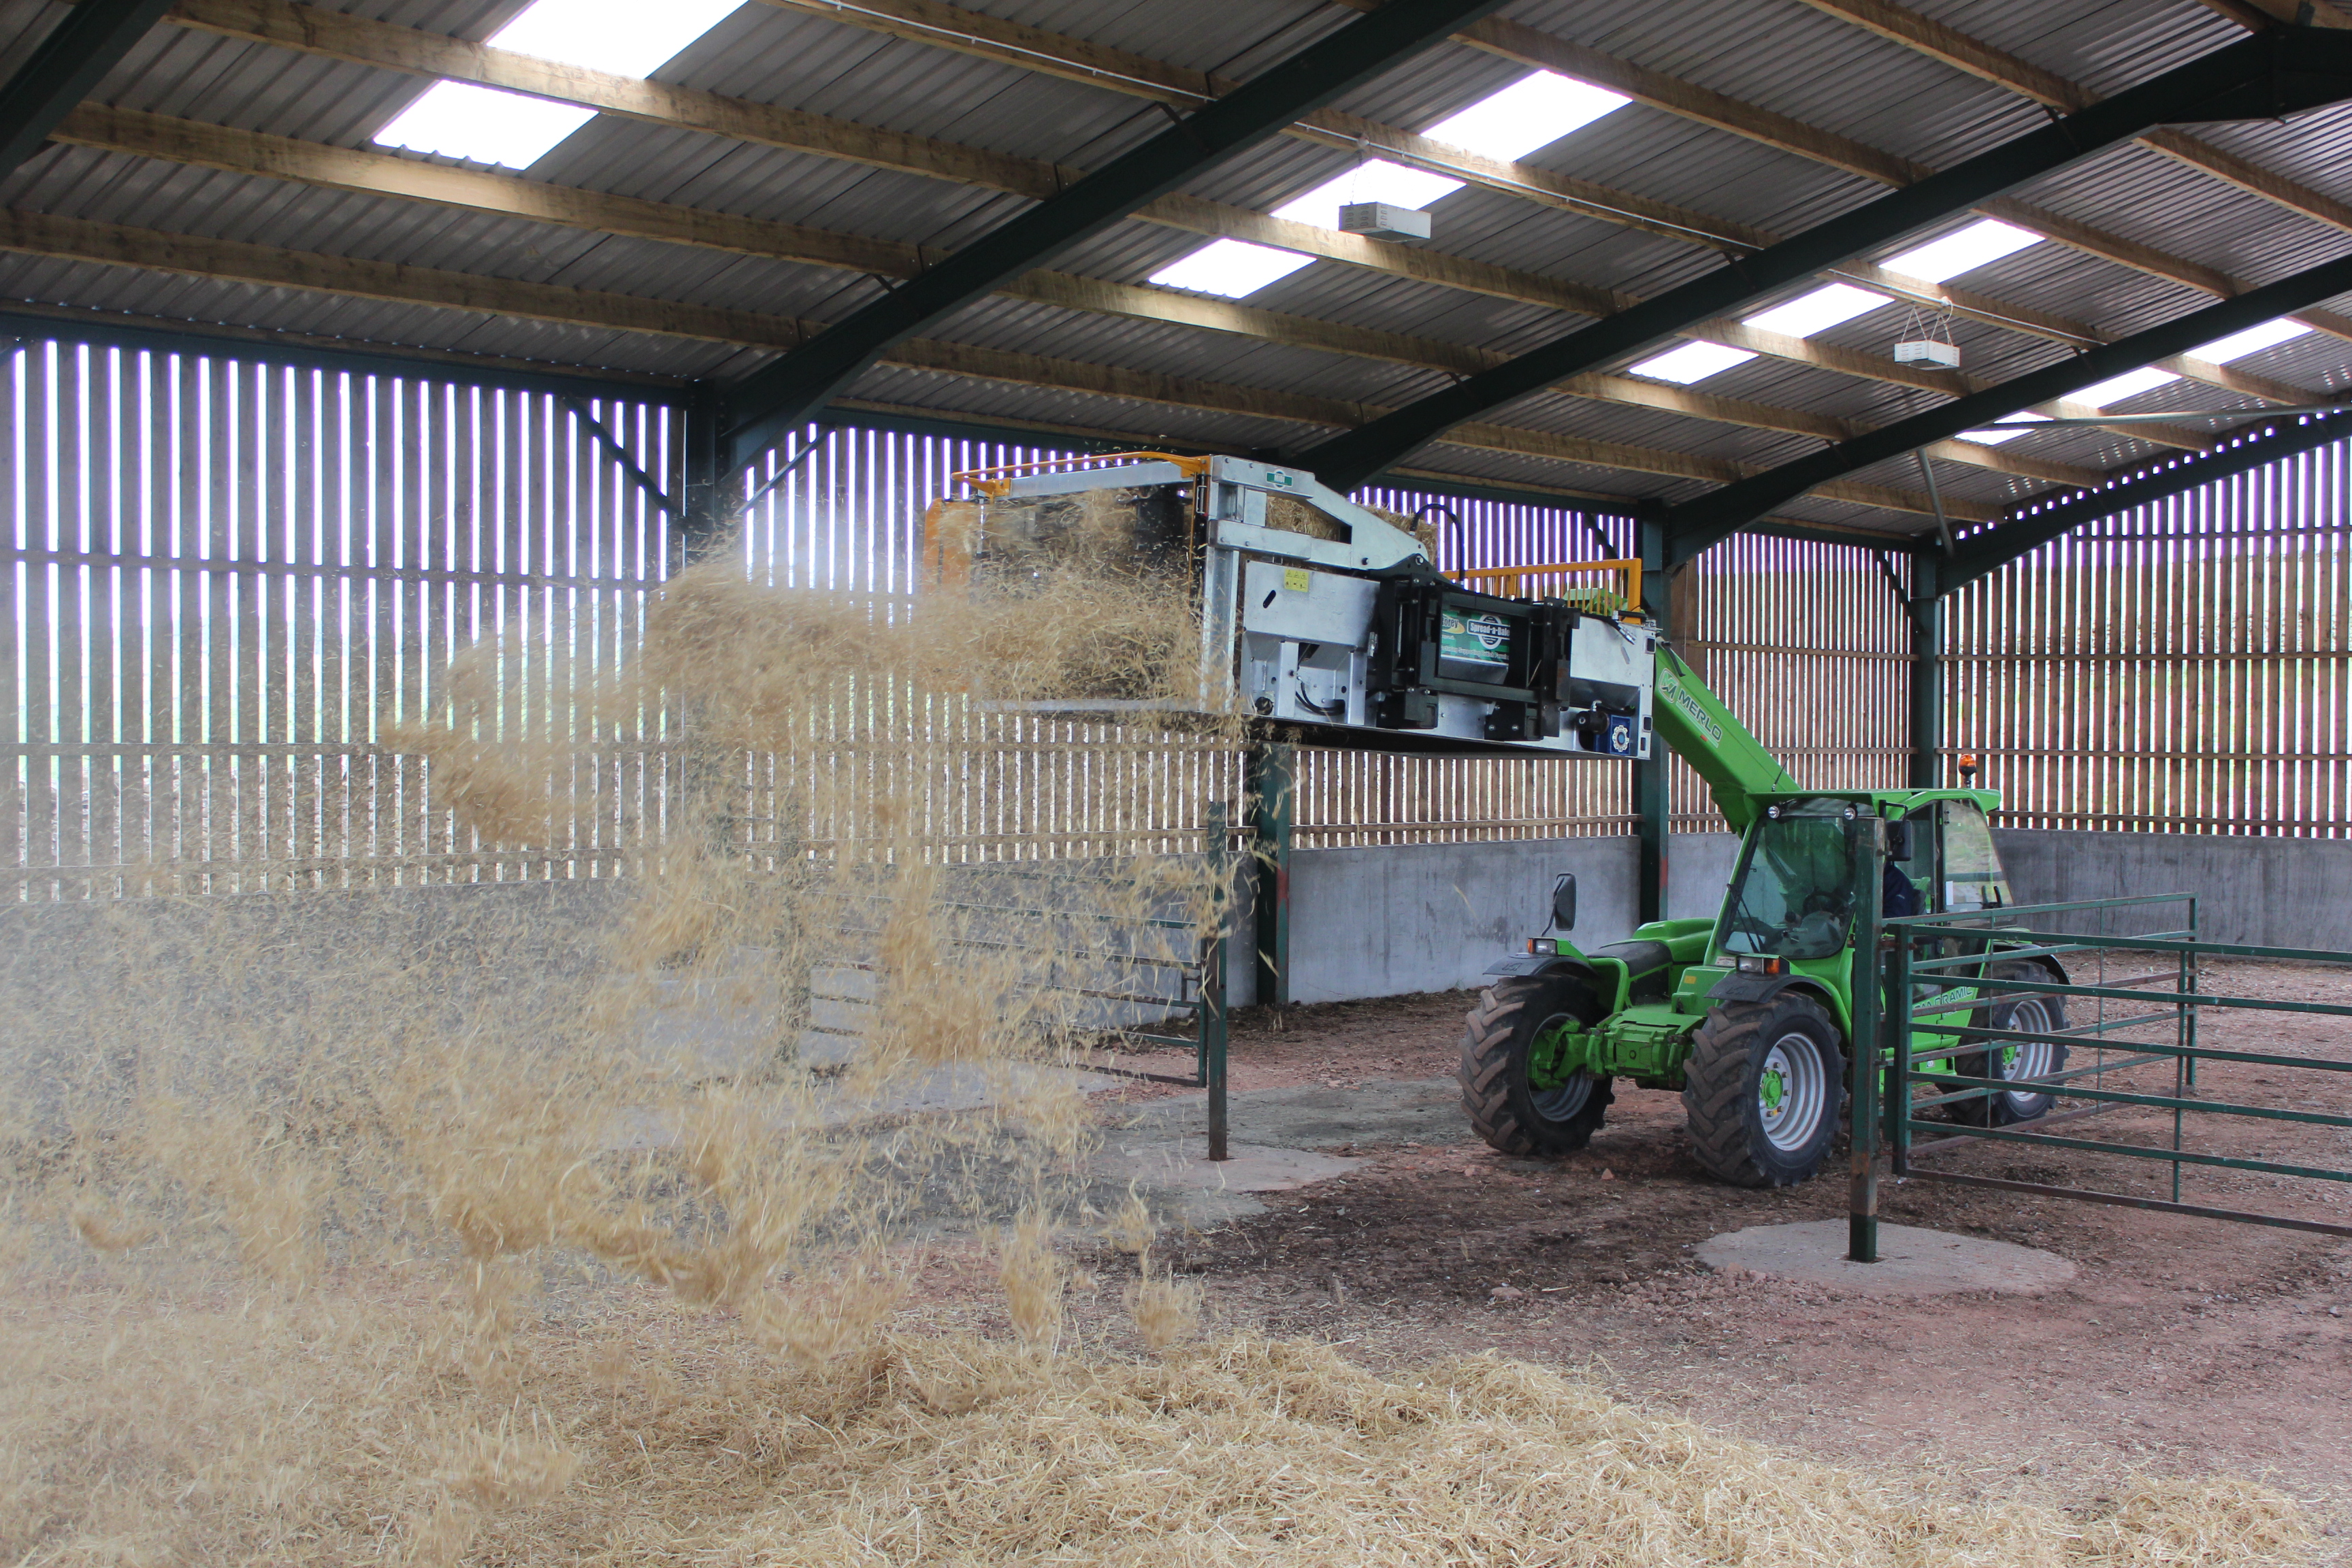 NEW DEALERS FOR SPREAD-A-BALE